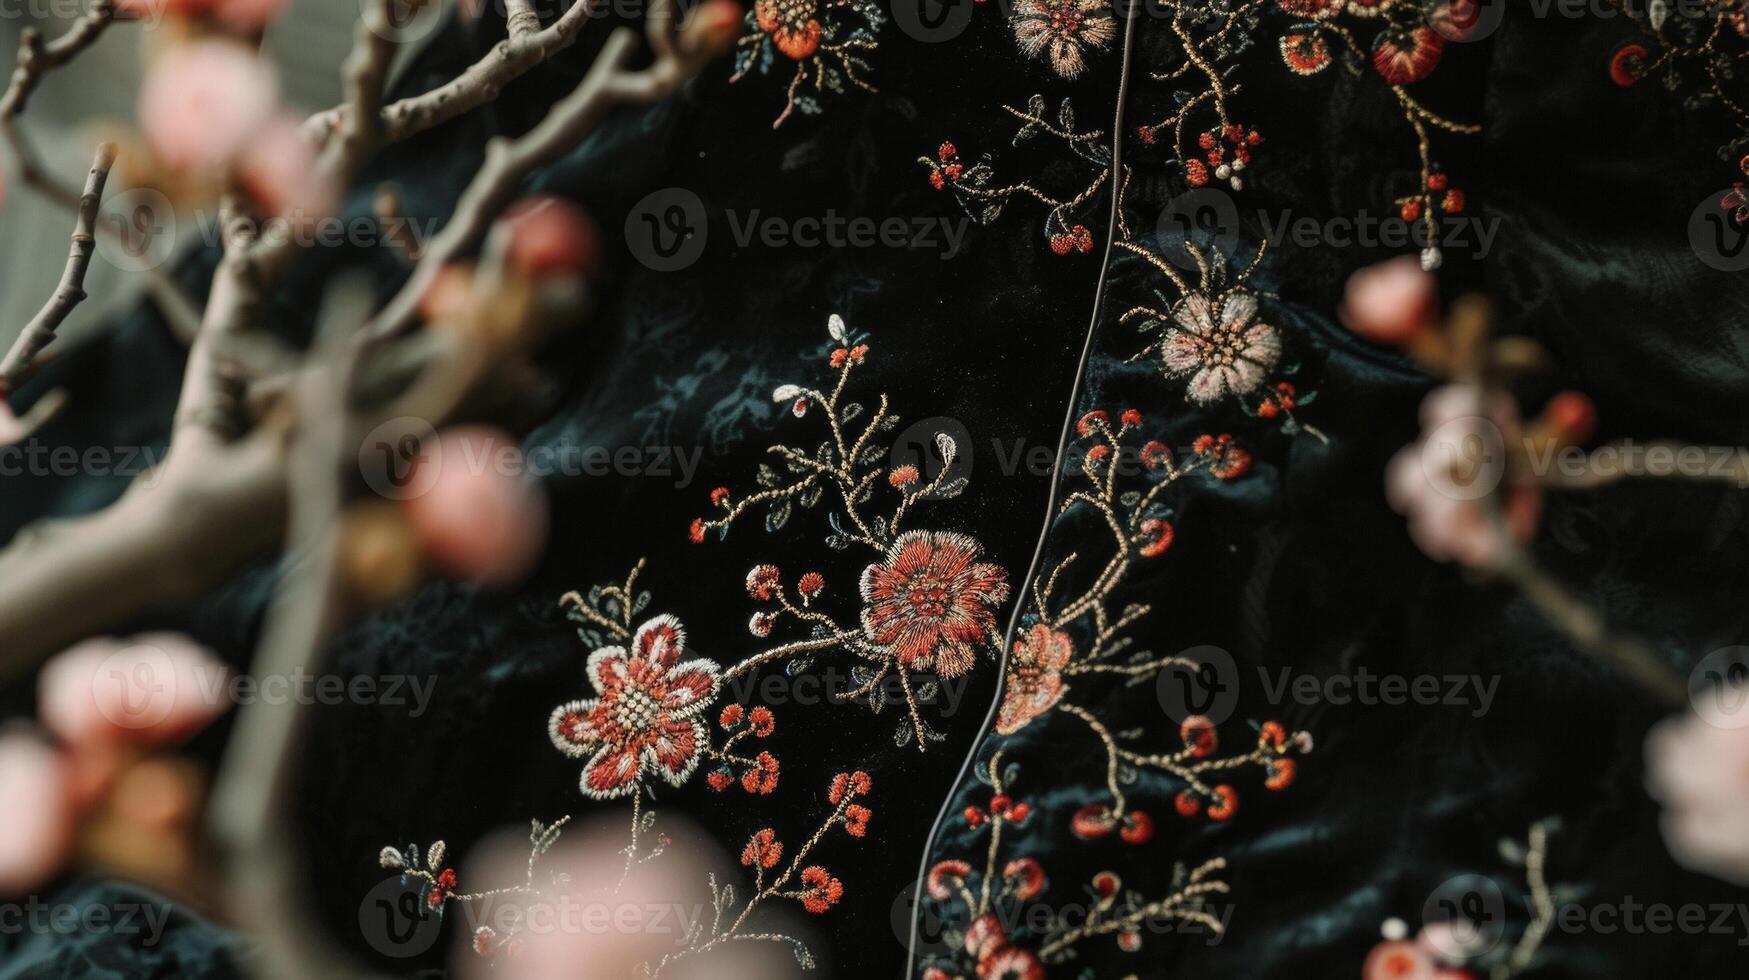 A highneck velvet dress featuring rich floral embellishments inspired by traditional Chinese embroidery. Perfect for a romantic evening under the stars photo